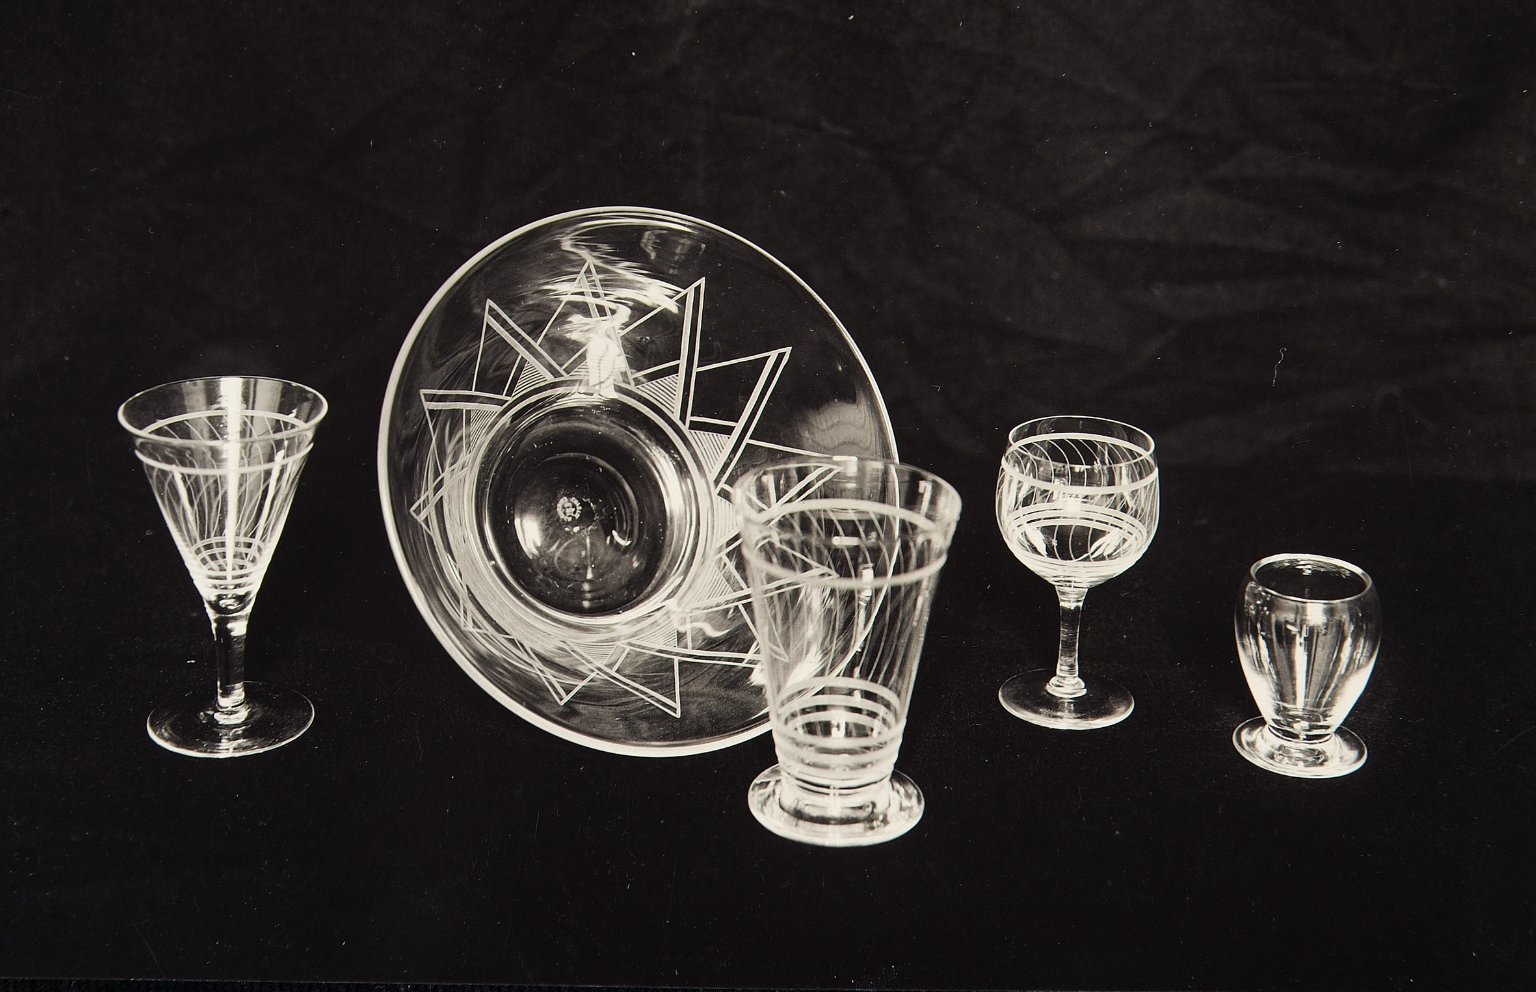 Five glass objects lined up against a plain black background. From left to right are a tumbler glass with geometric patterns, a large bowl with triangular decorations laid upright on its side, a cone-shaped glass with wavy lines, a goblet with wavy lines, and a small pear-shaped vessel that almost looks metallic.